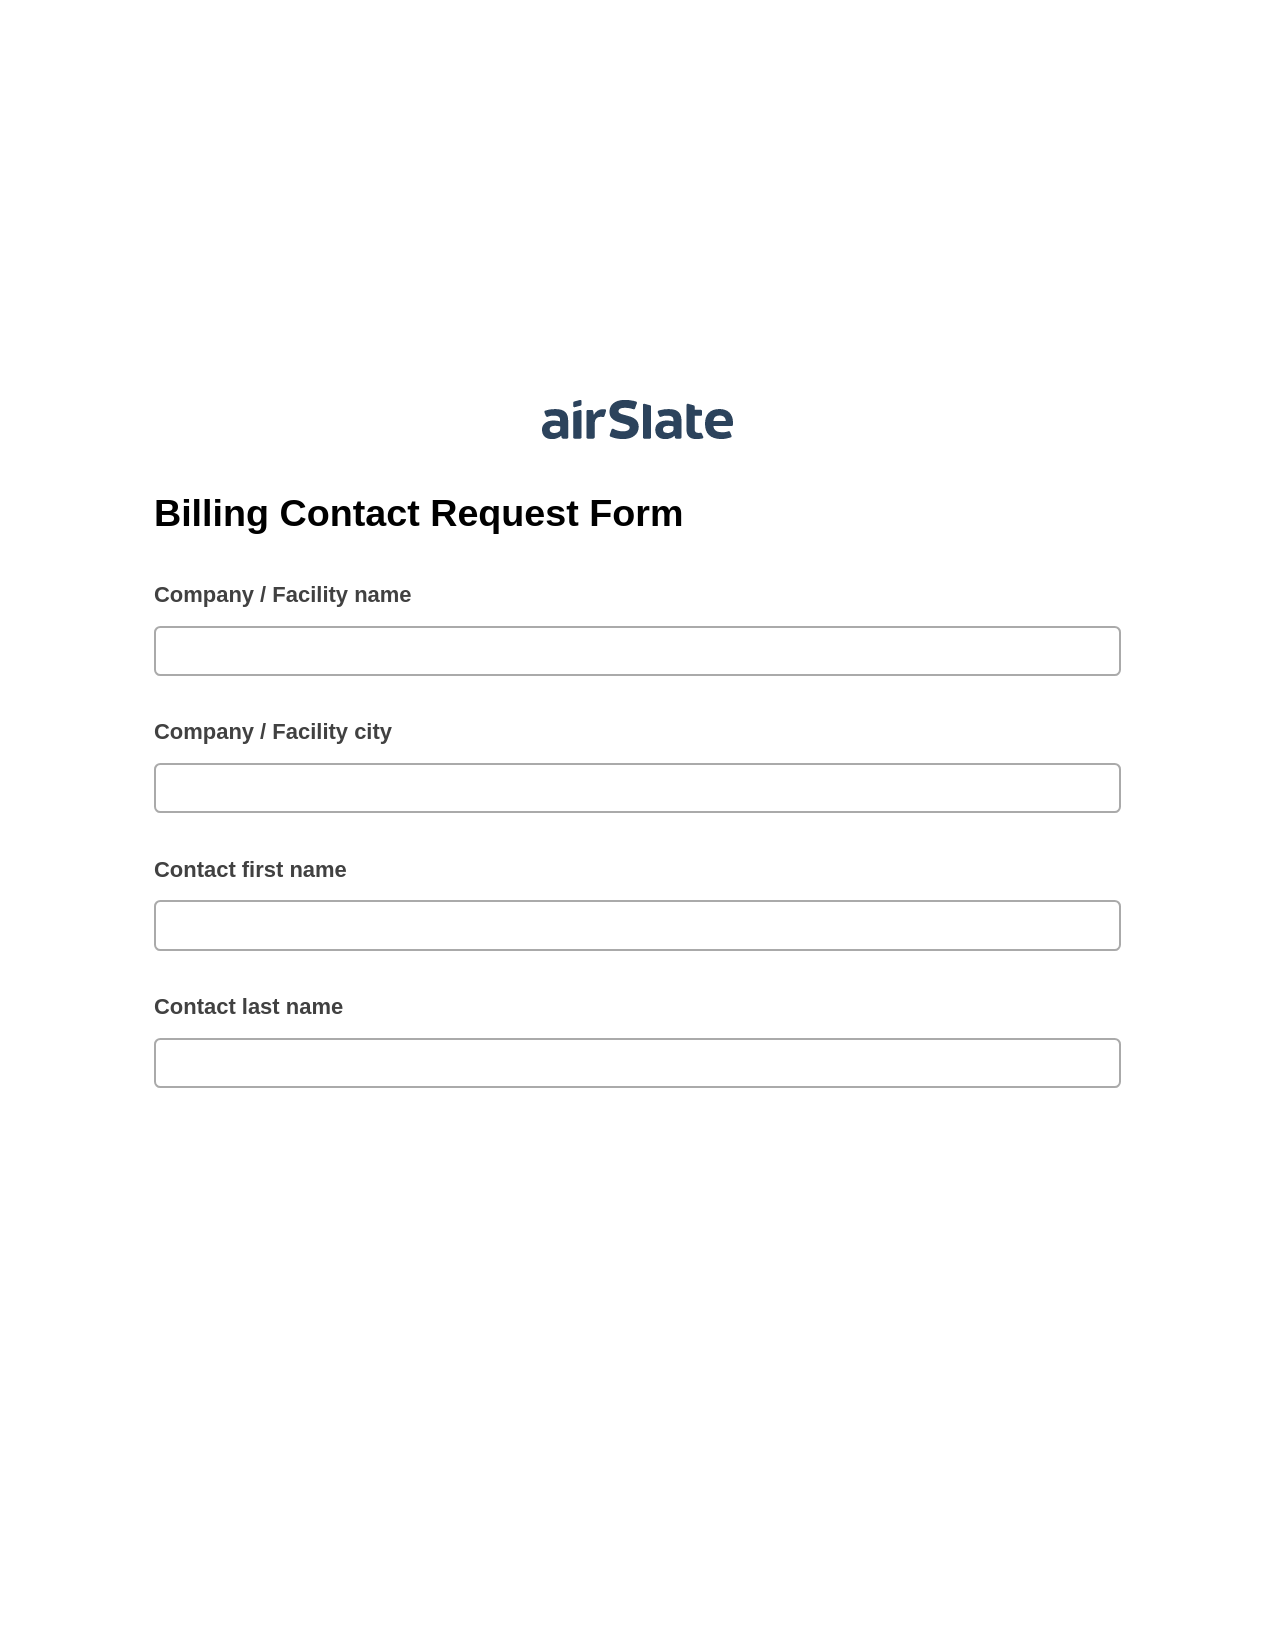 Multirole Billing Contact Request Form Pre-fill Dropdowns from CSV File Bot, Jira Bot, Export to Salesforce Bot